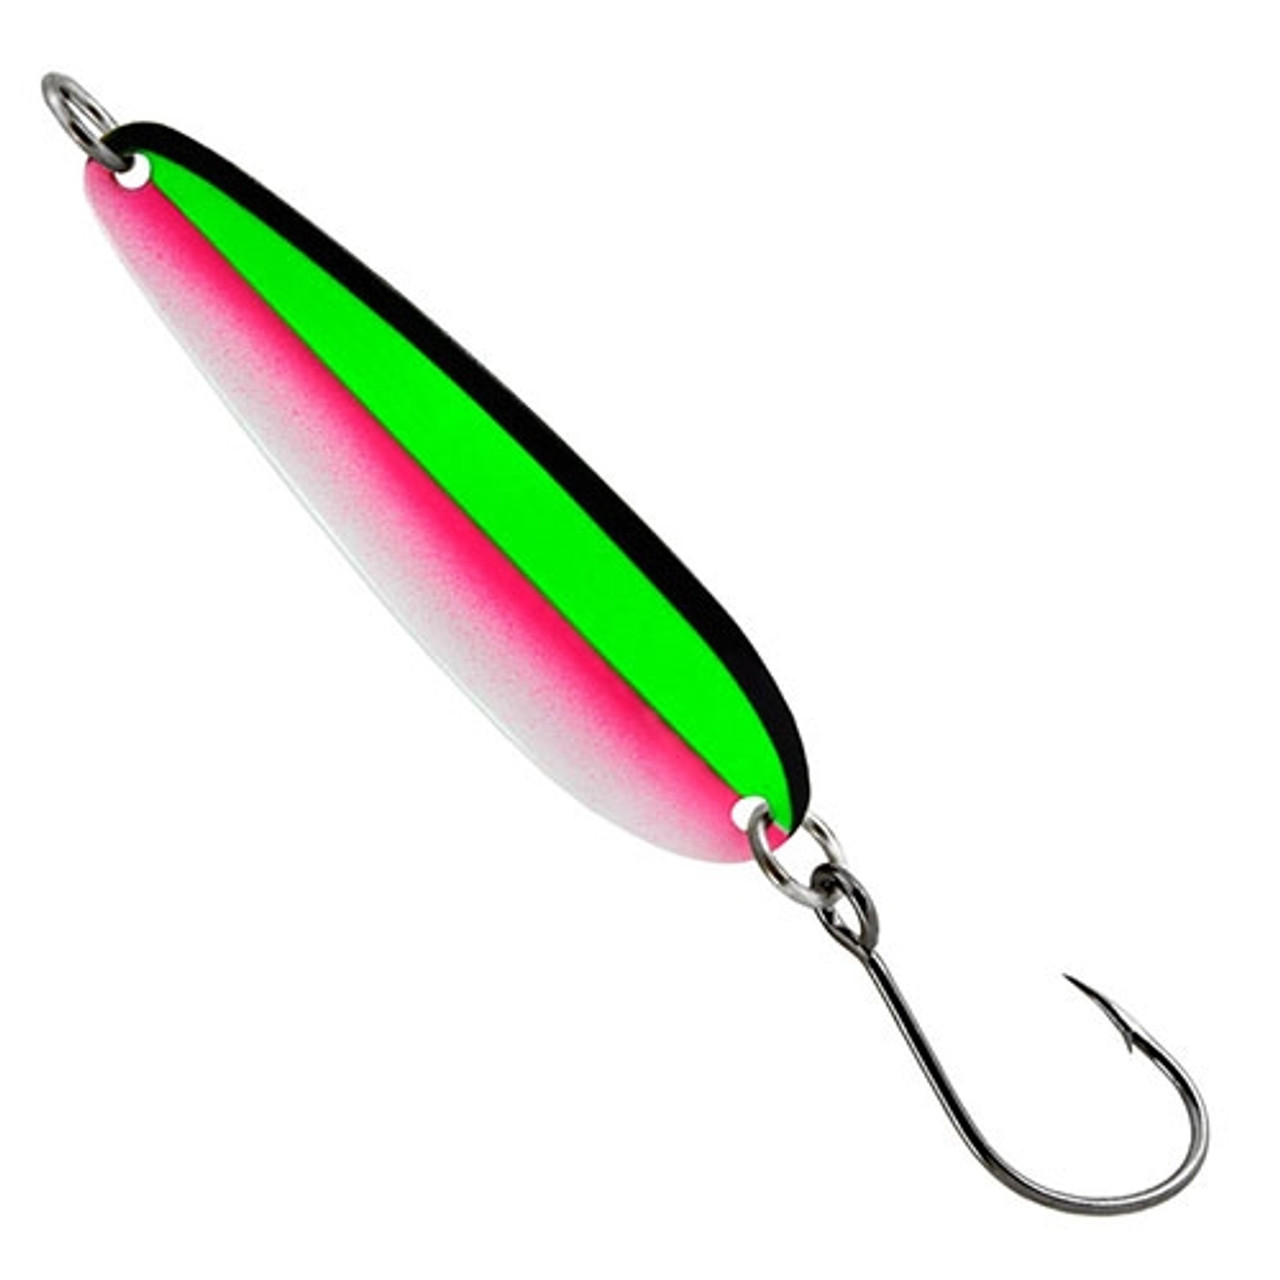 Gibbs Delta Tackle G-Force Spoon